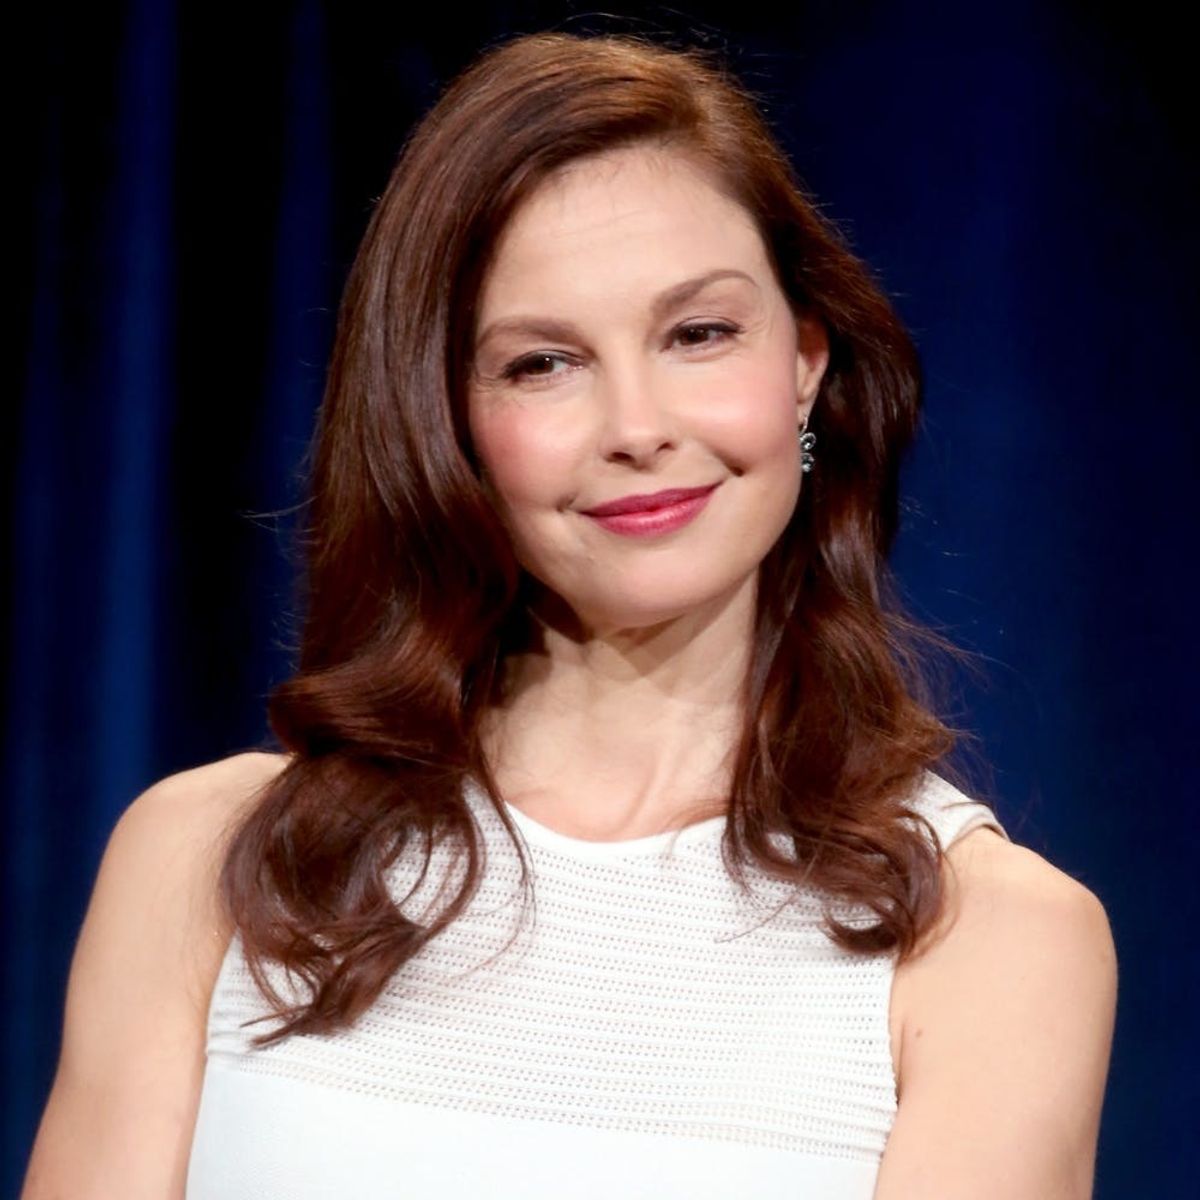 Ashley Judd’s Sister Wynonna Is Speaking Out Against Her #WomensMarch Speech